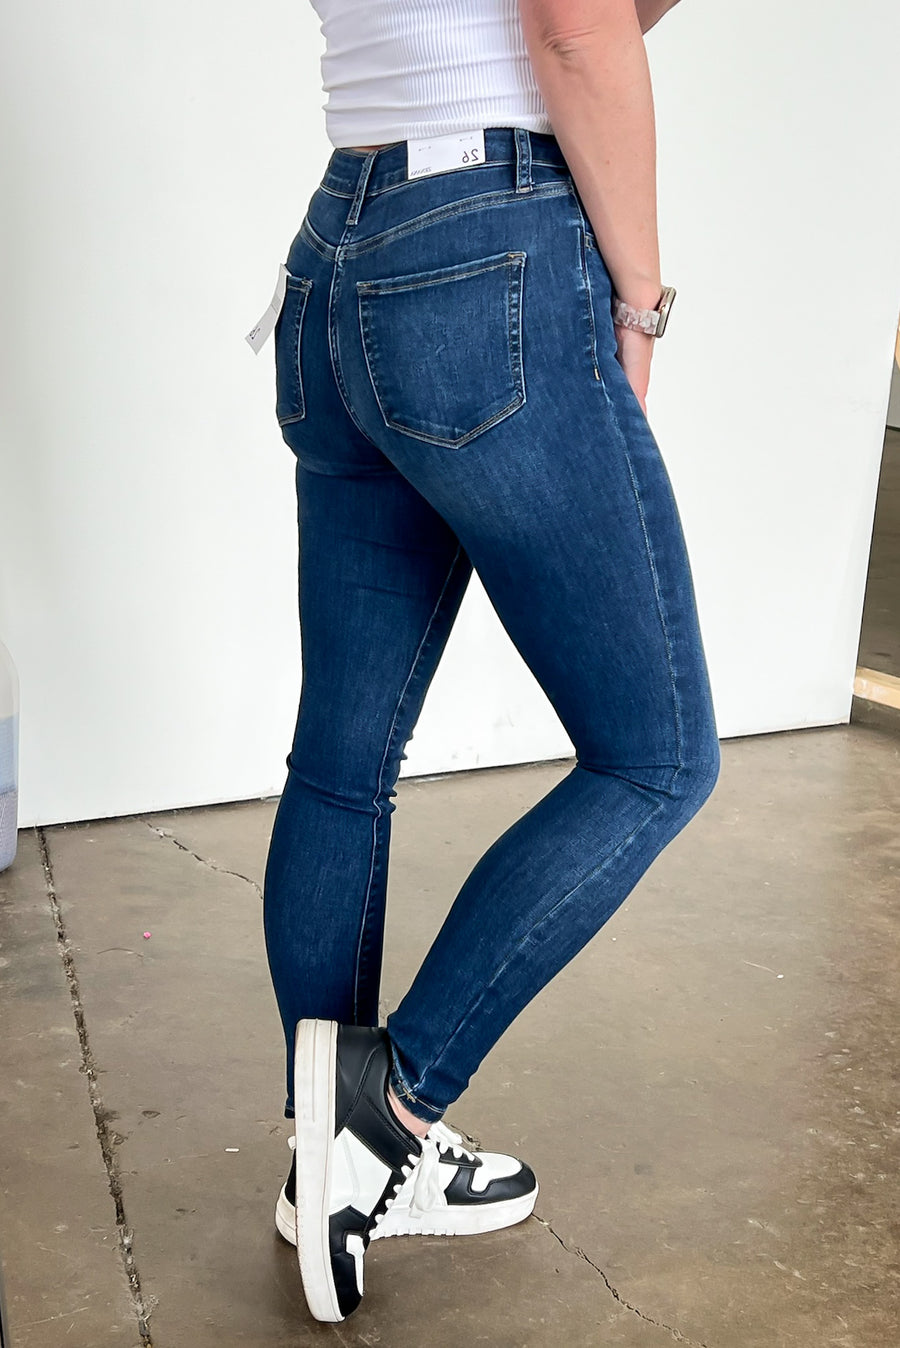  Good Intentions High Waist Skinny Jeans - Madison and Mallory